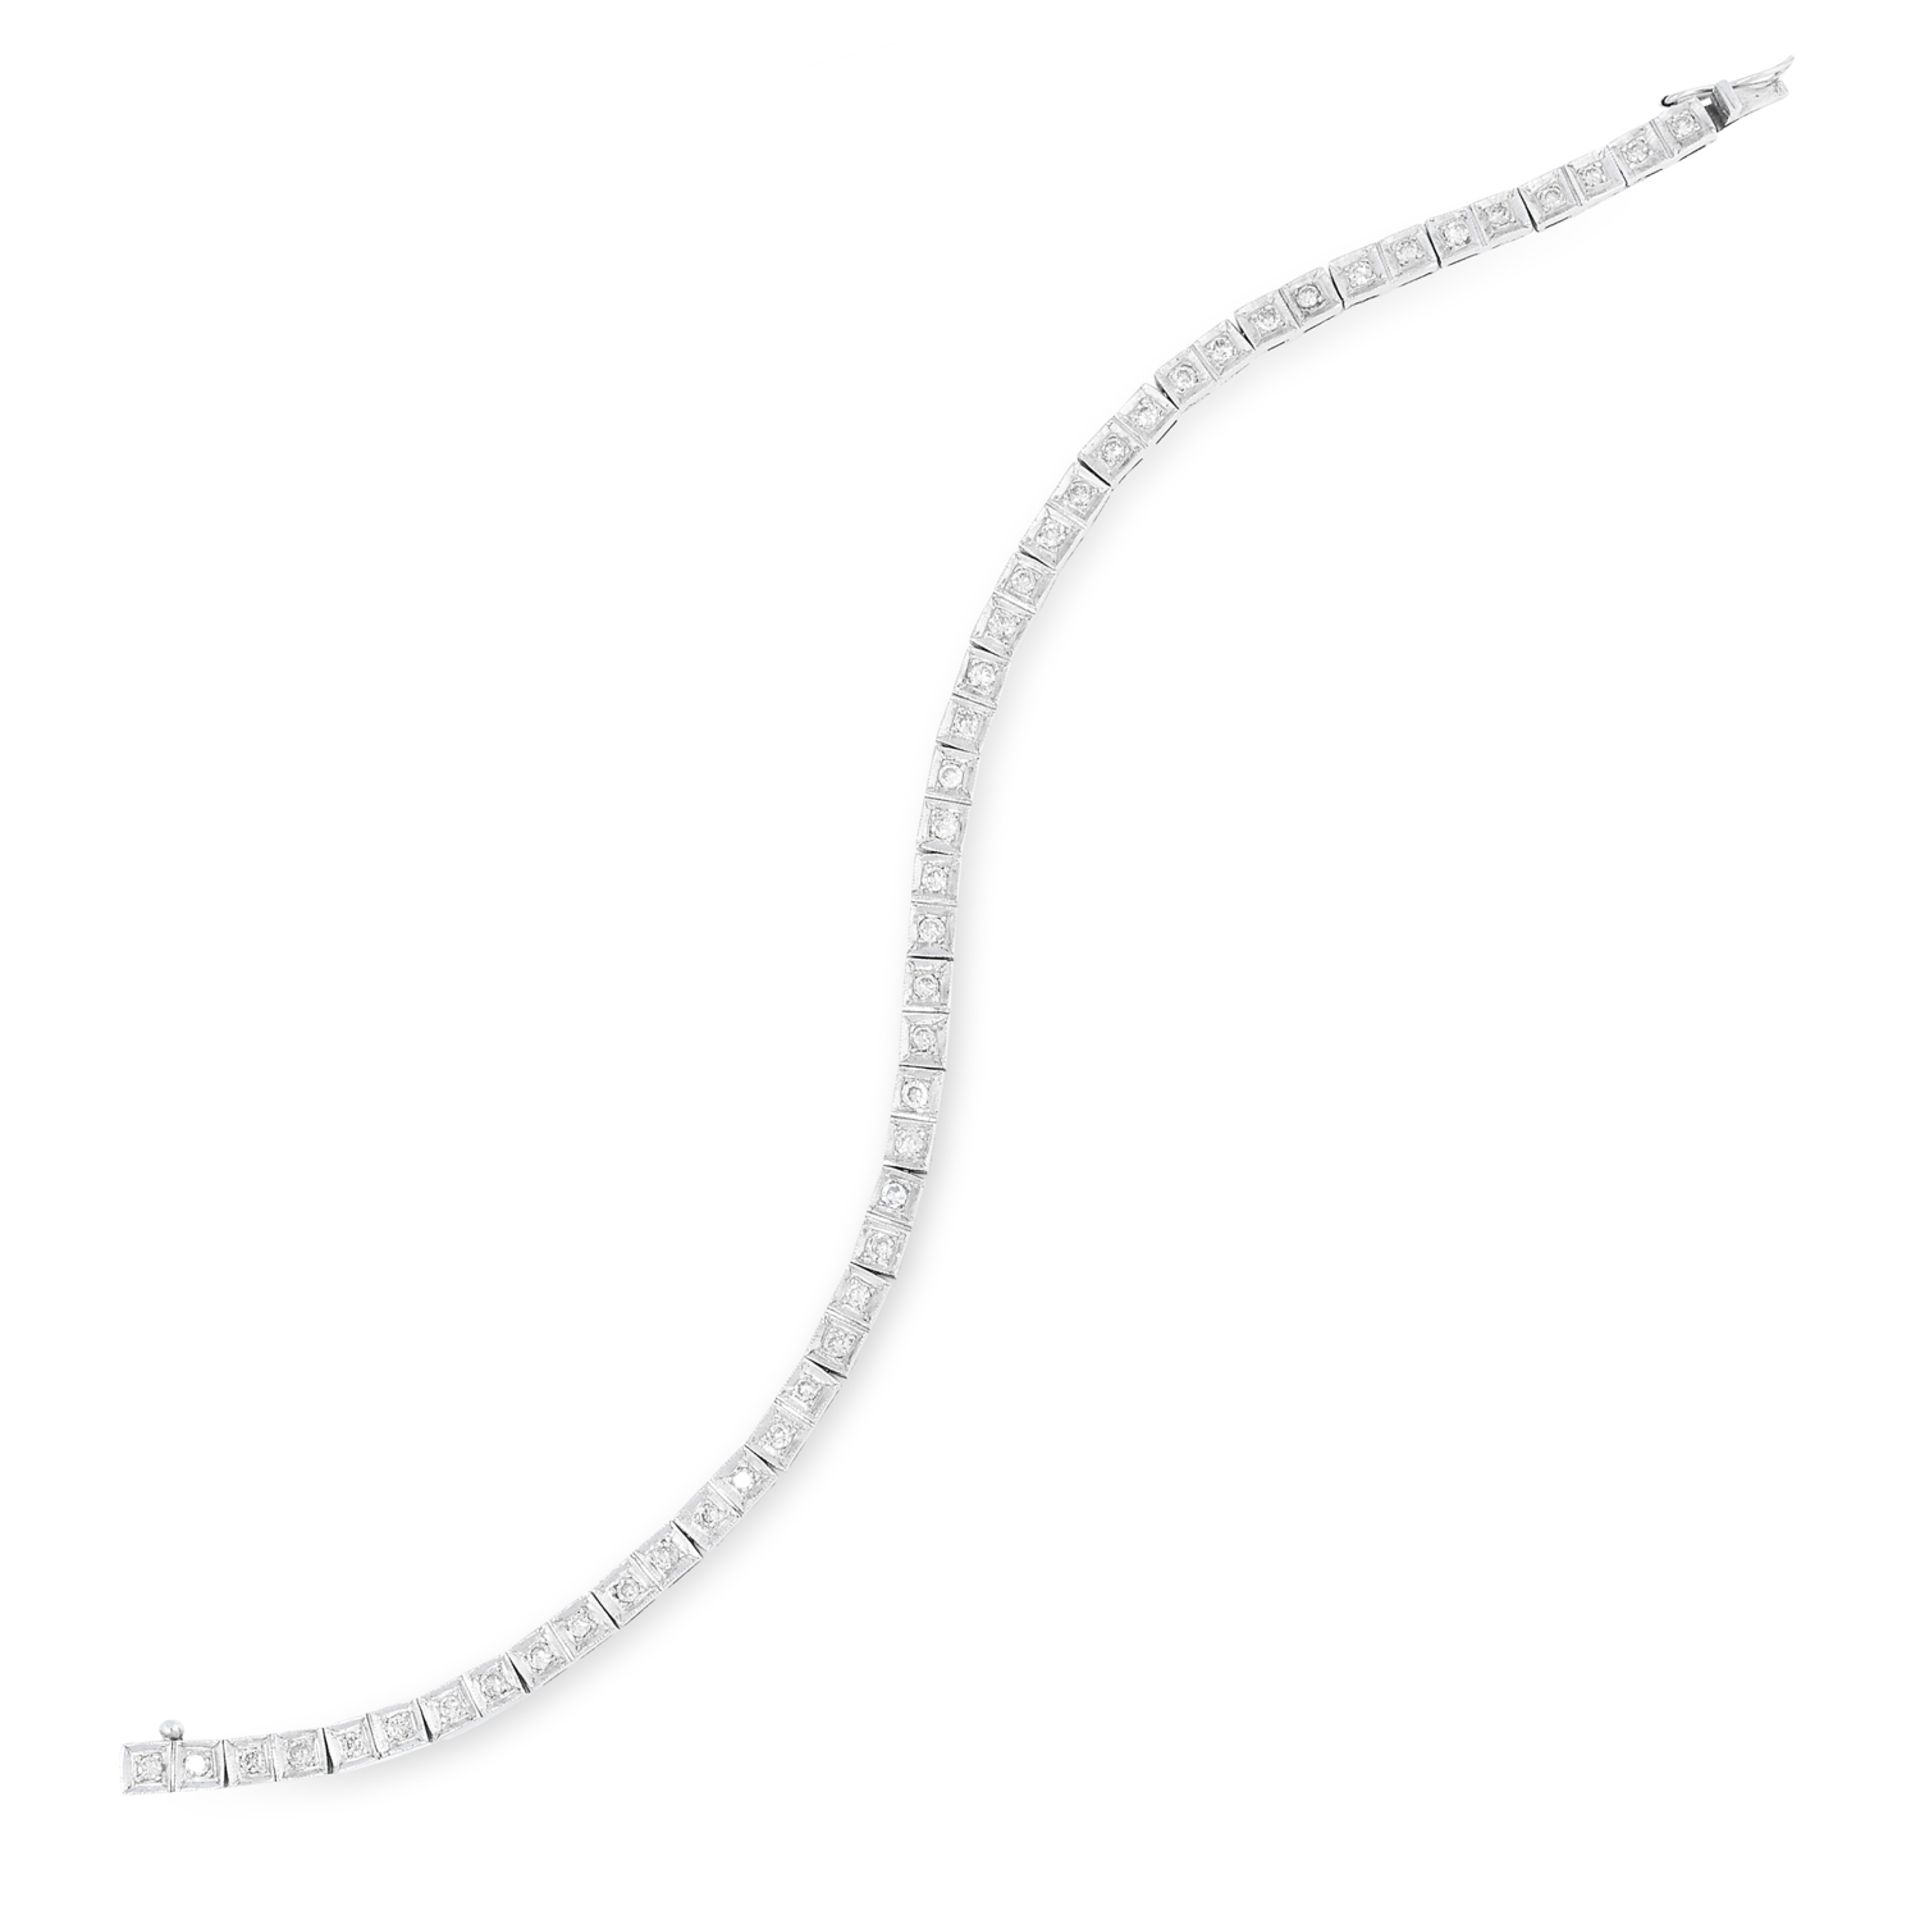 A DIAMOND LINE BRACELET, CIRCA 1940 comprising a single row of forty-eight round cut diamonds within